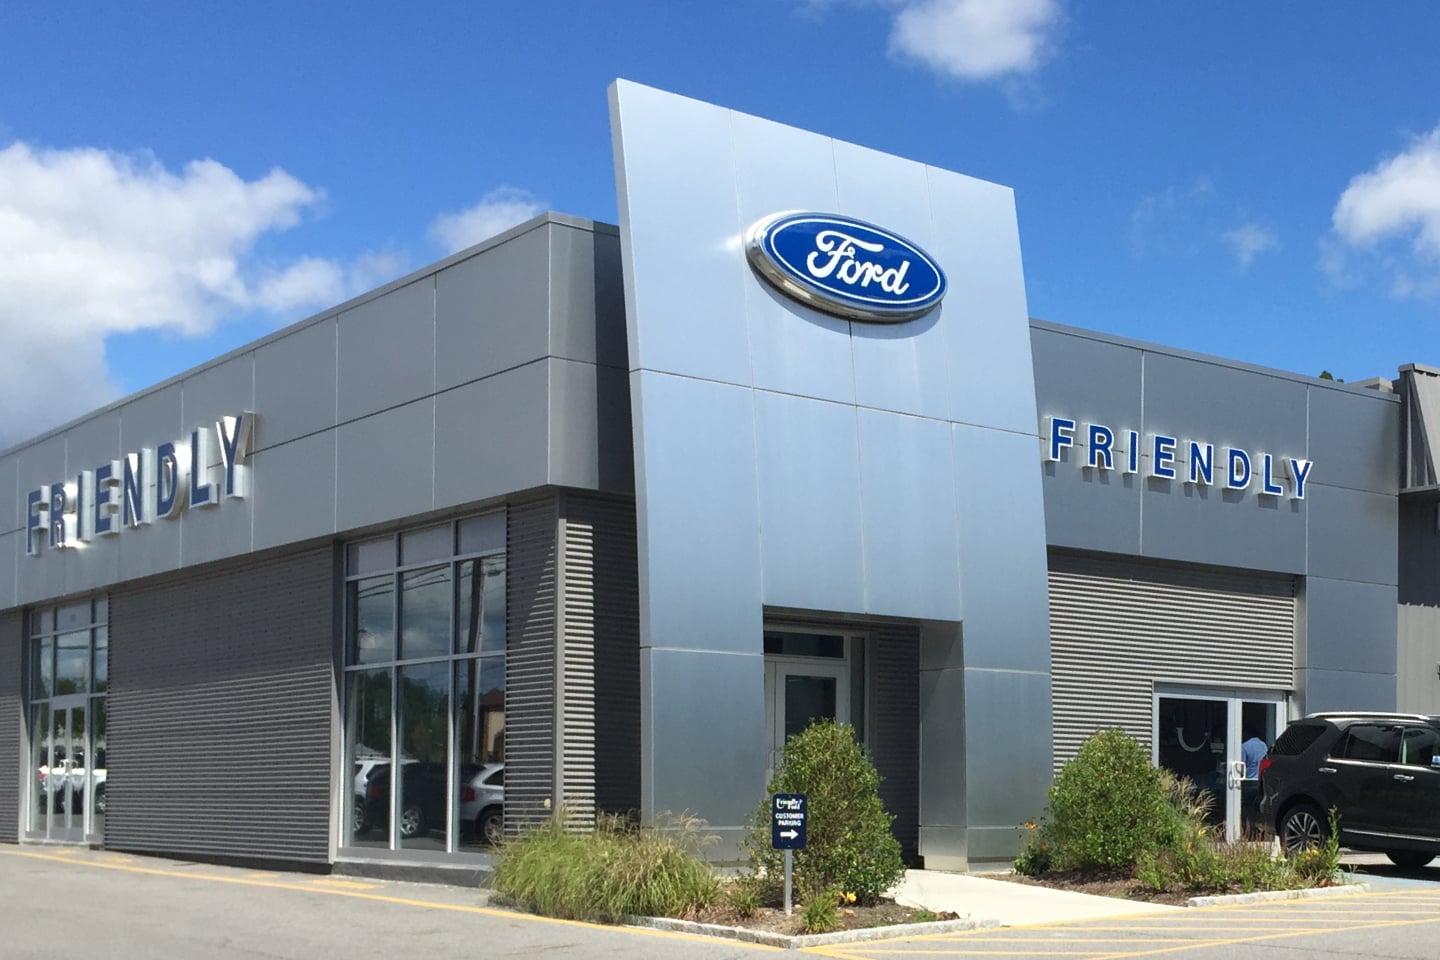 Friendly Ford Ford Dealership in Poughkeepsie NY